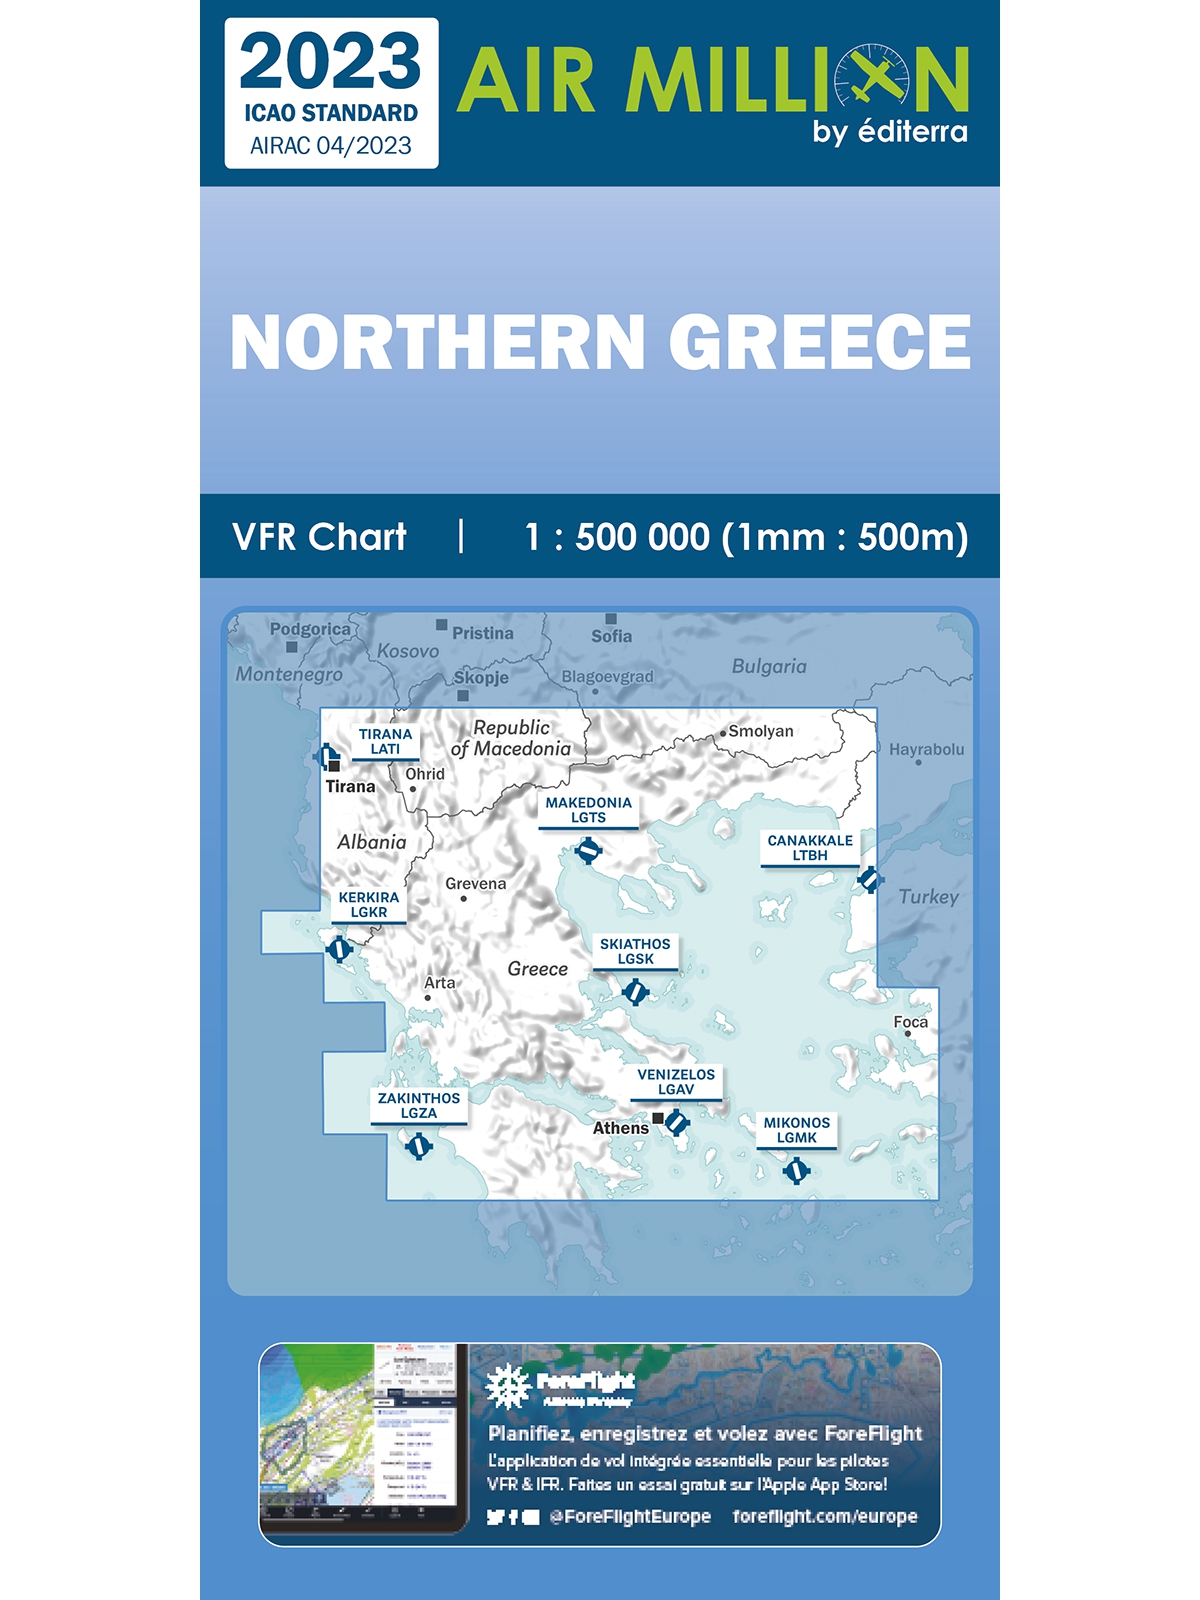 Northern Greece - Air Million Zoom VFR Chart 1:500.000, folded, 2023